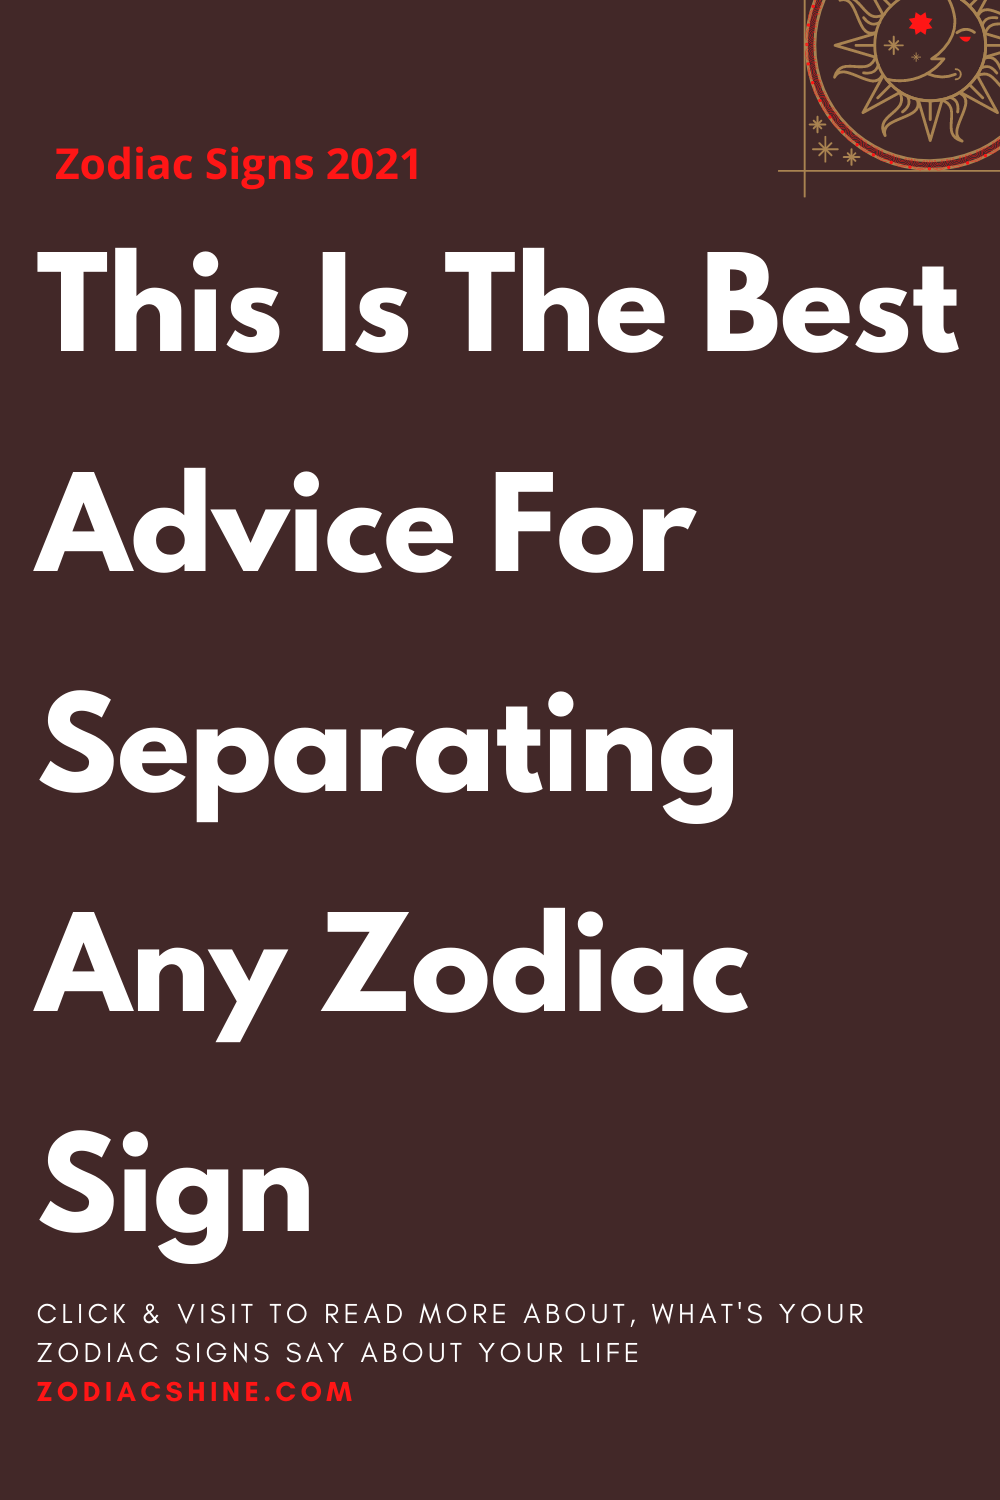 This Is The Best Advice For Separating Any Zodiac Sign